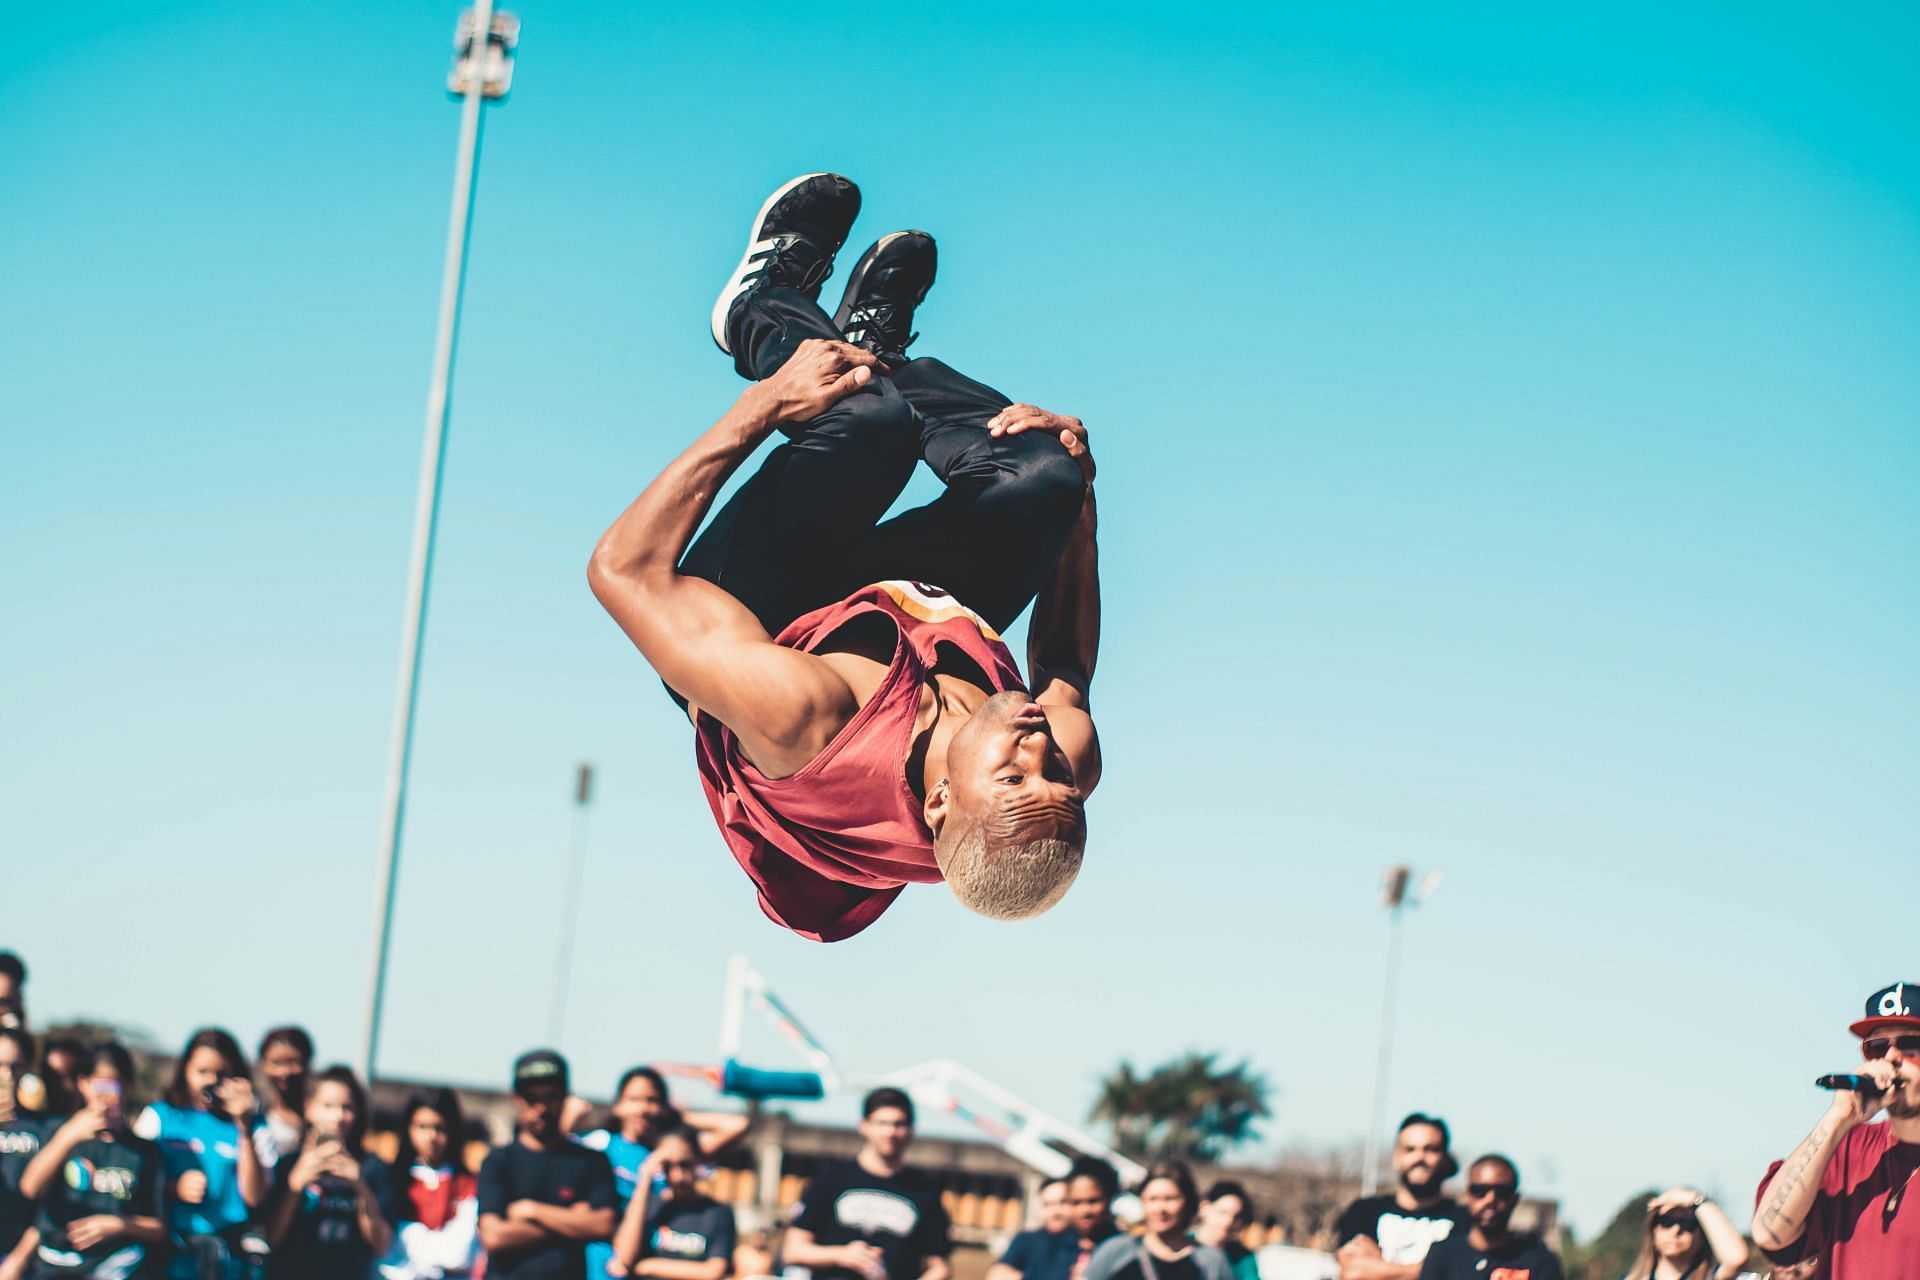 Learn how to get better at backflip with this article. (Image via Pexels/Wallace Chuck)